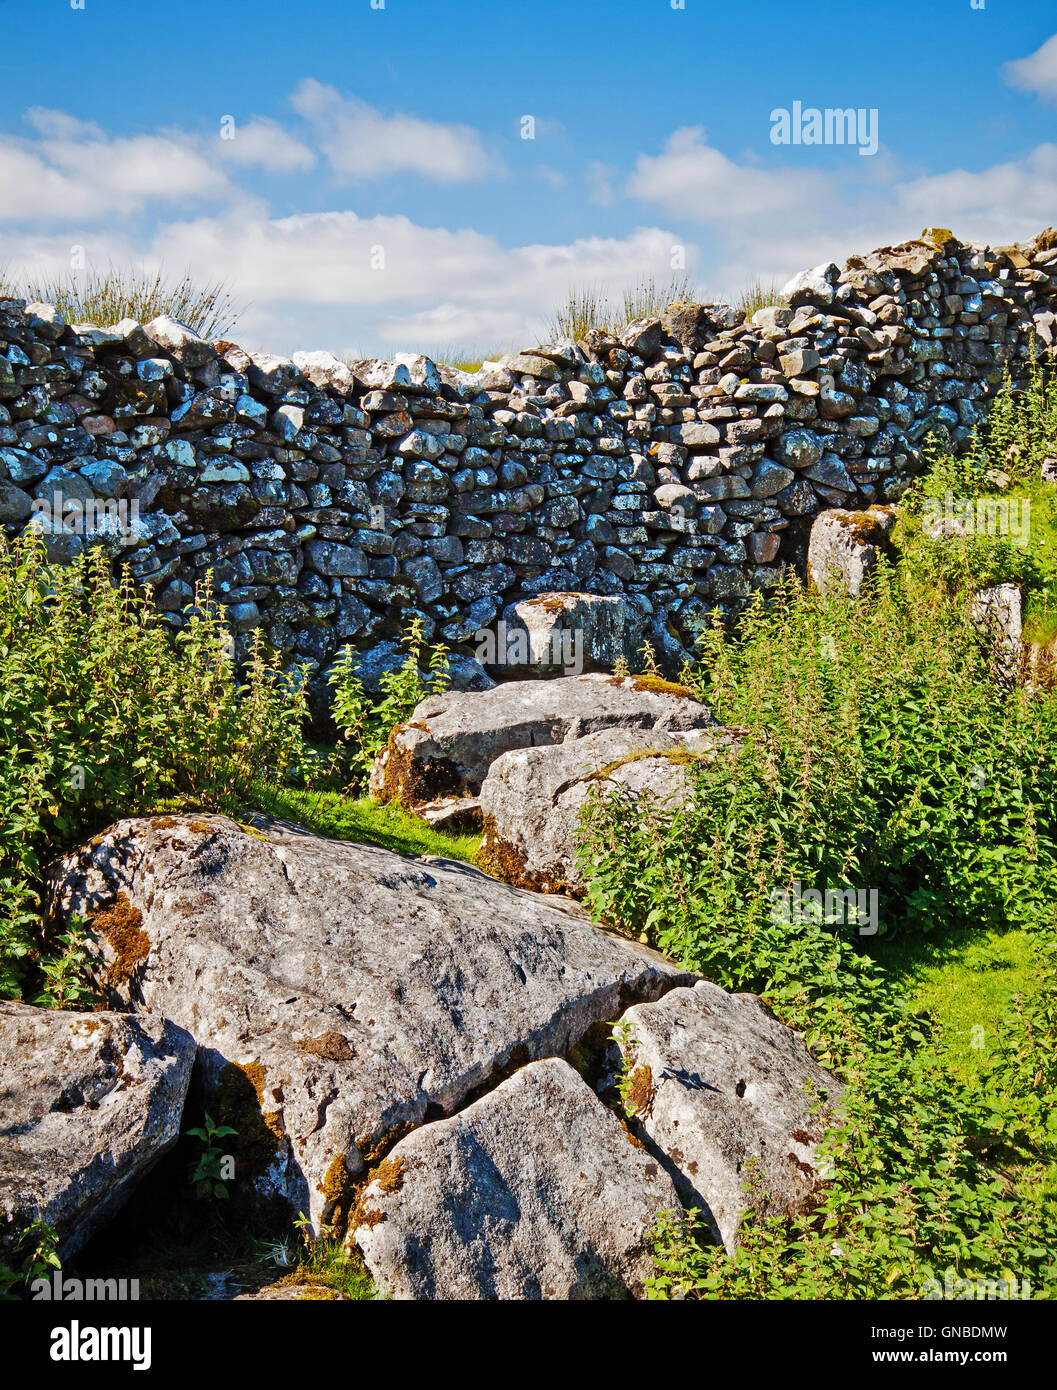 a dip in the dry stone walling Stock Photo